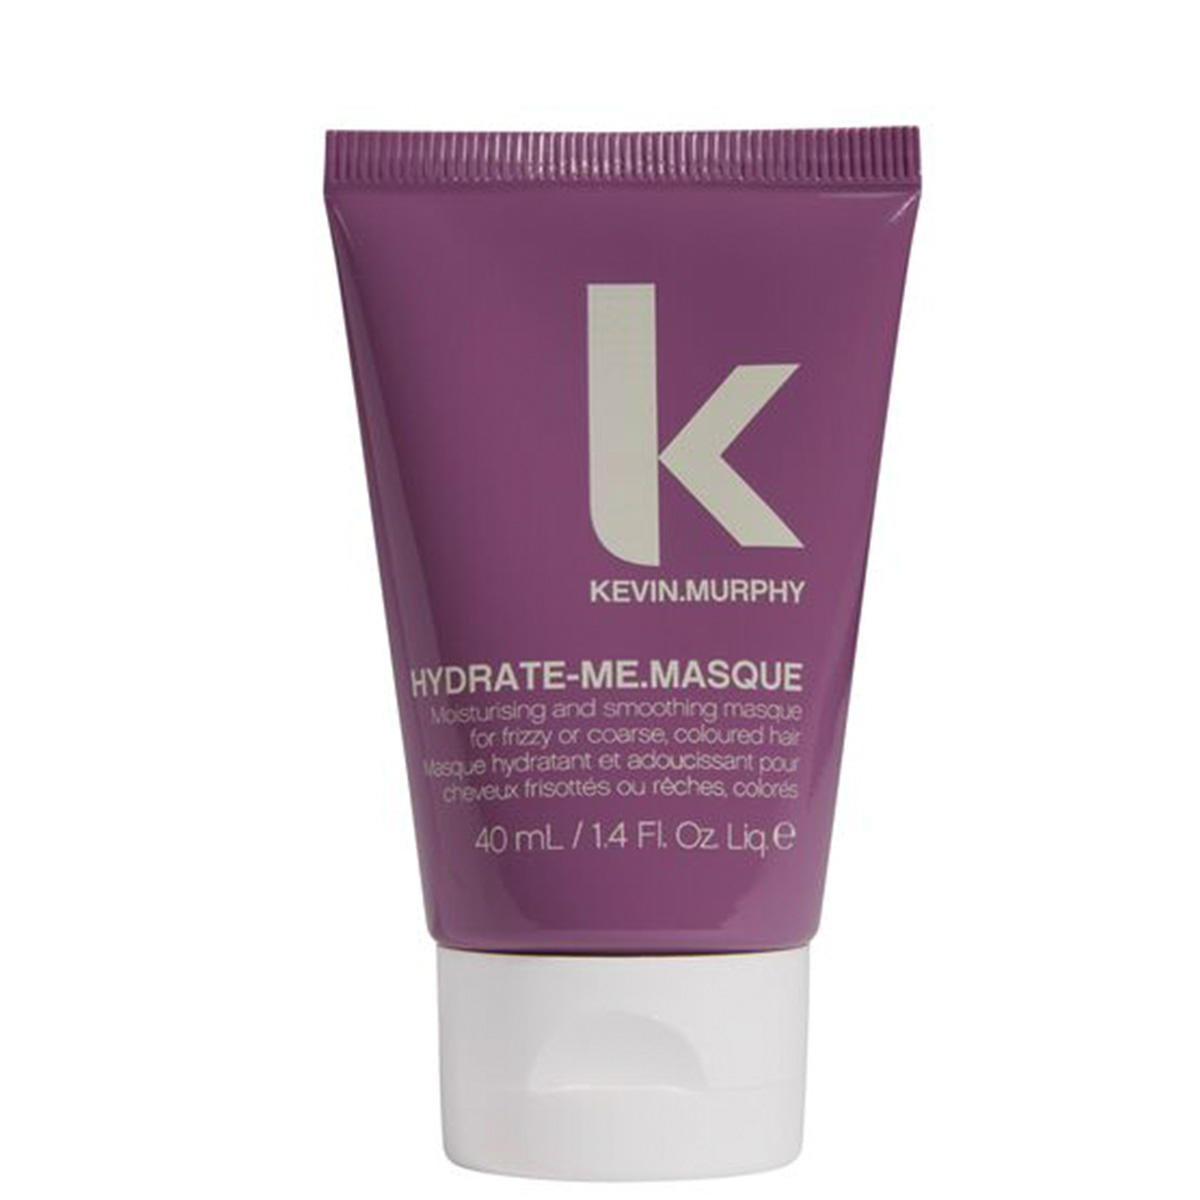 KEVIN.MURPHY HYDRATE-ME Masque 40 ml